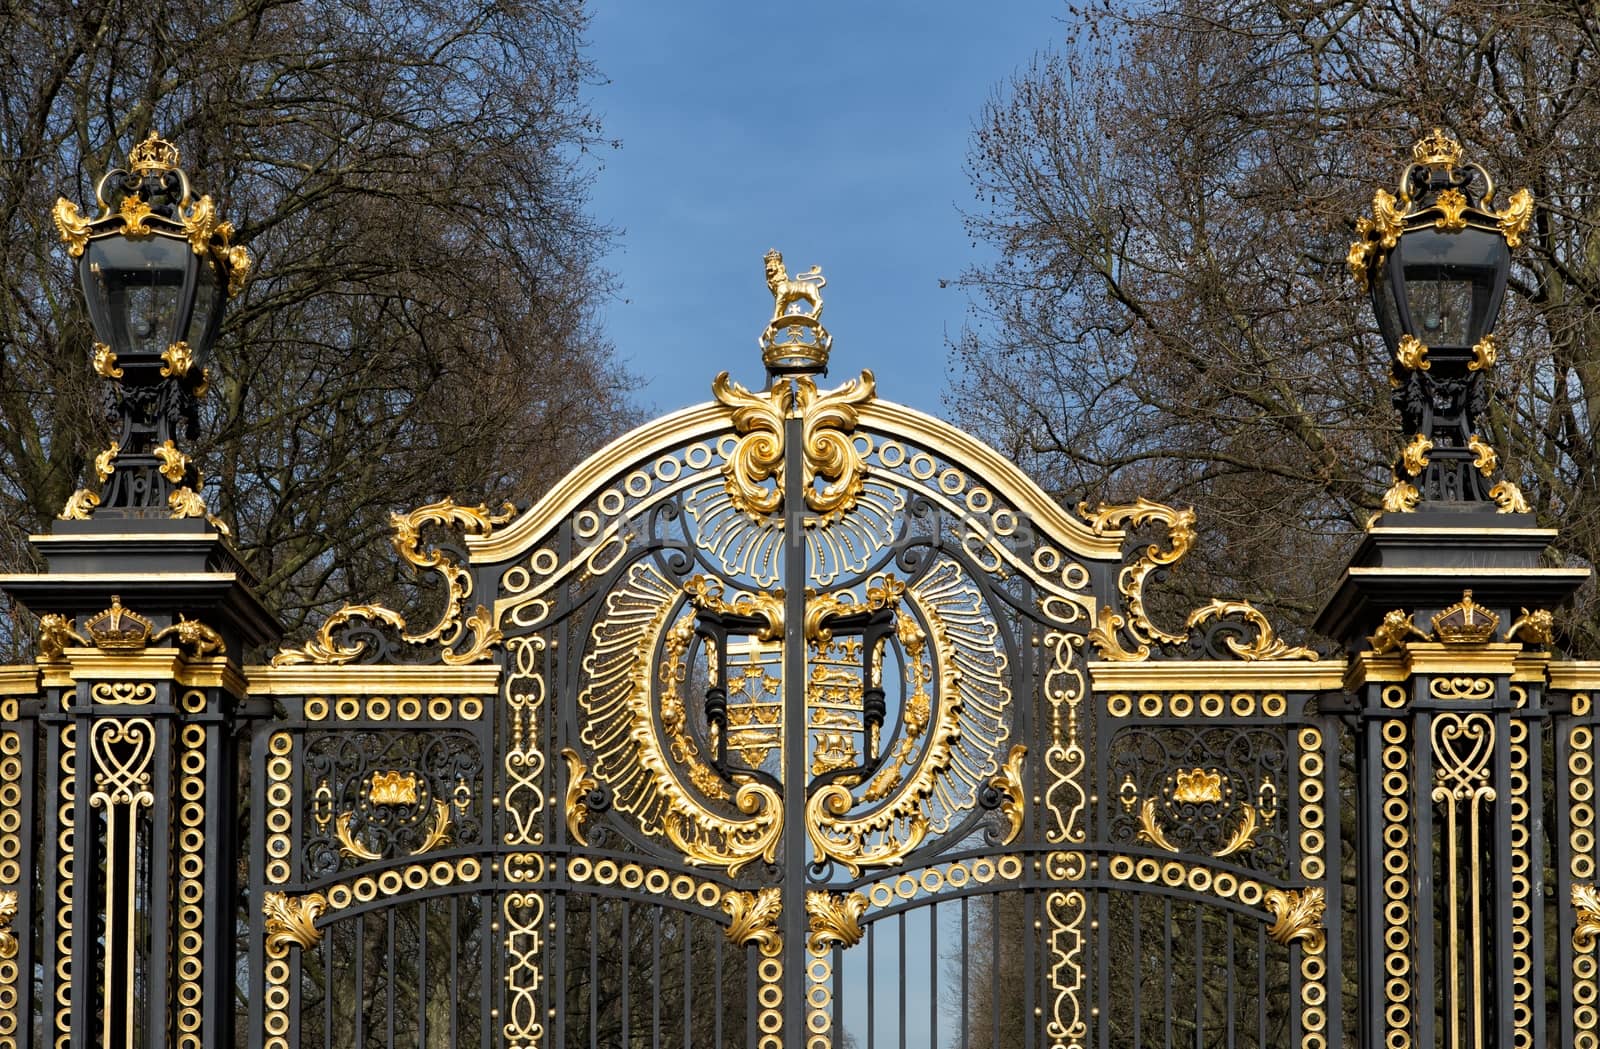 Metal gate of a park decorated with golden ornaments